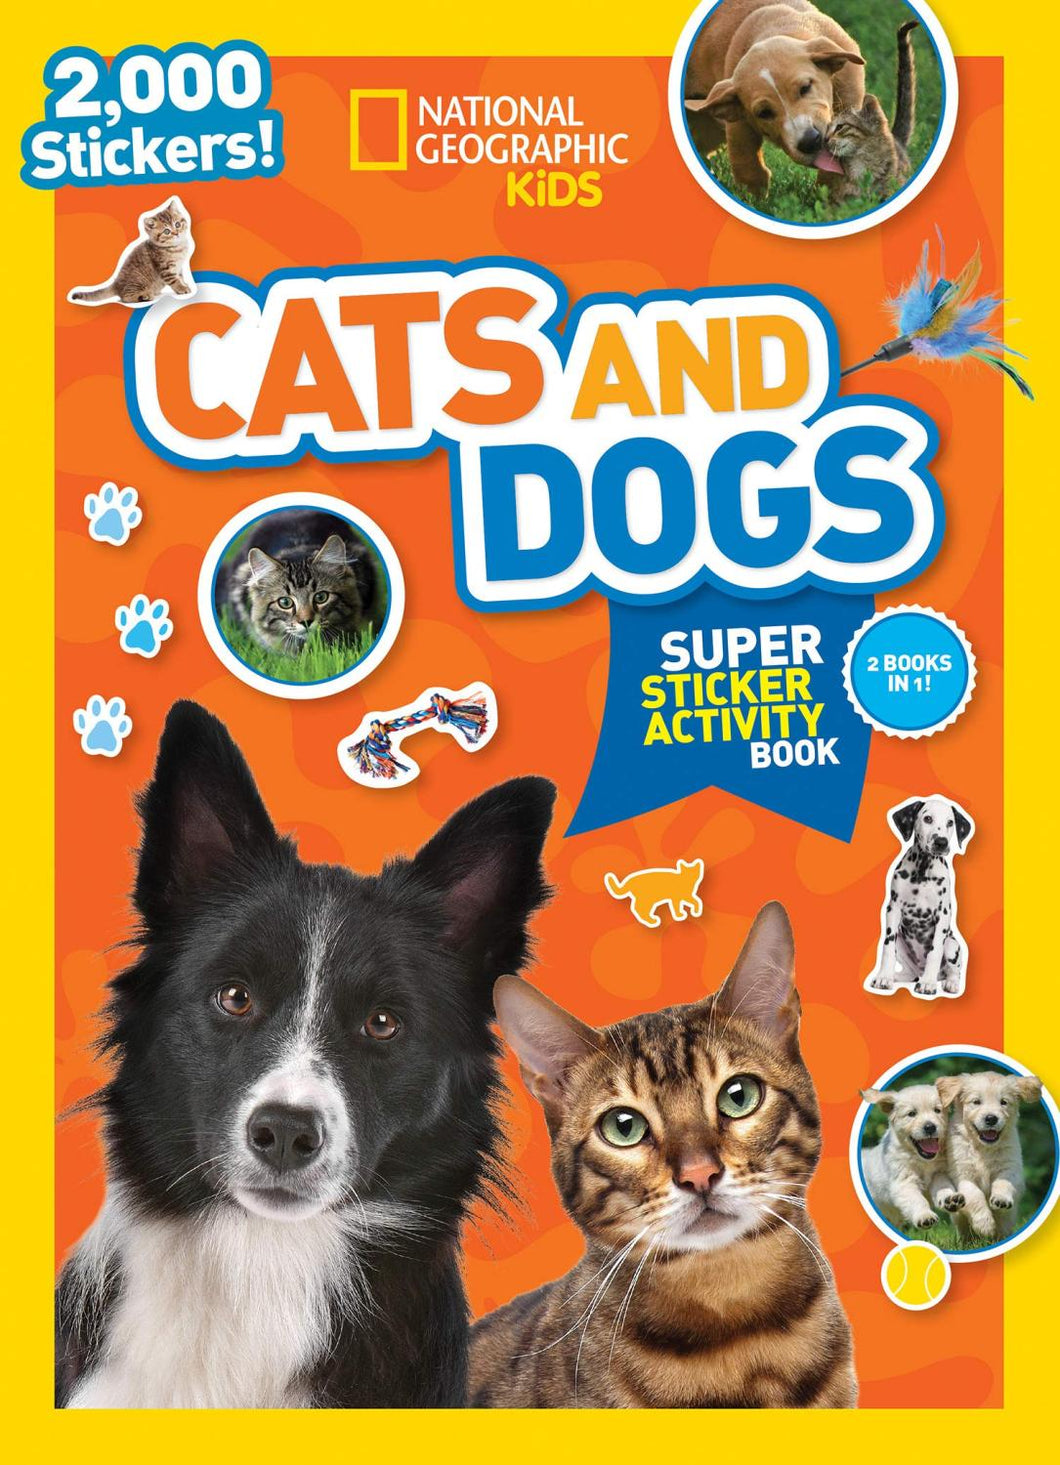 Cats & Dogs Super Sticker Activity Book by National Geographic